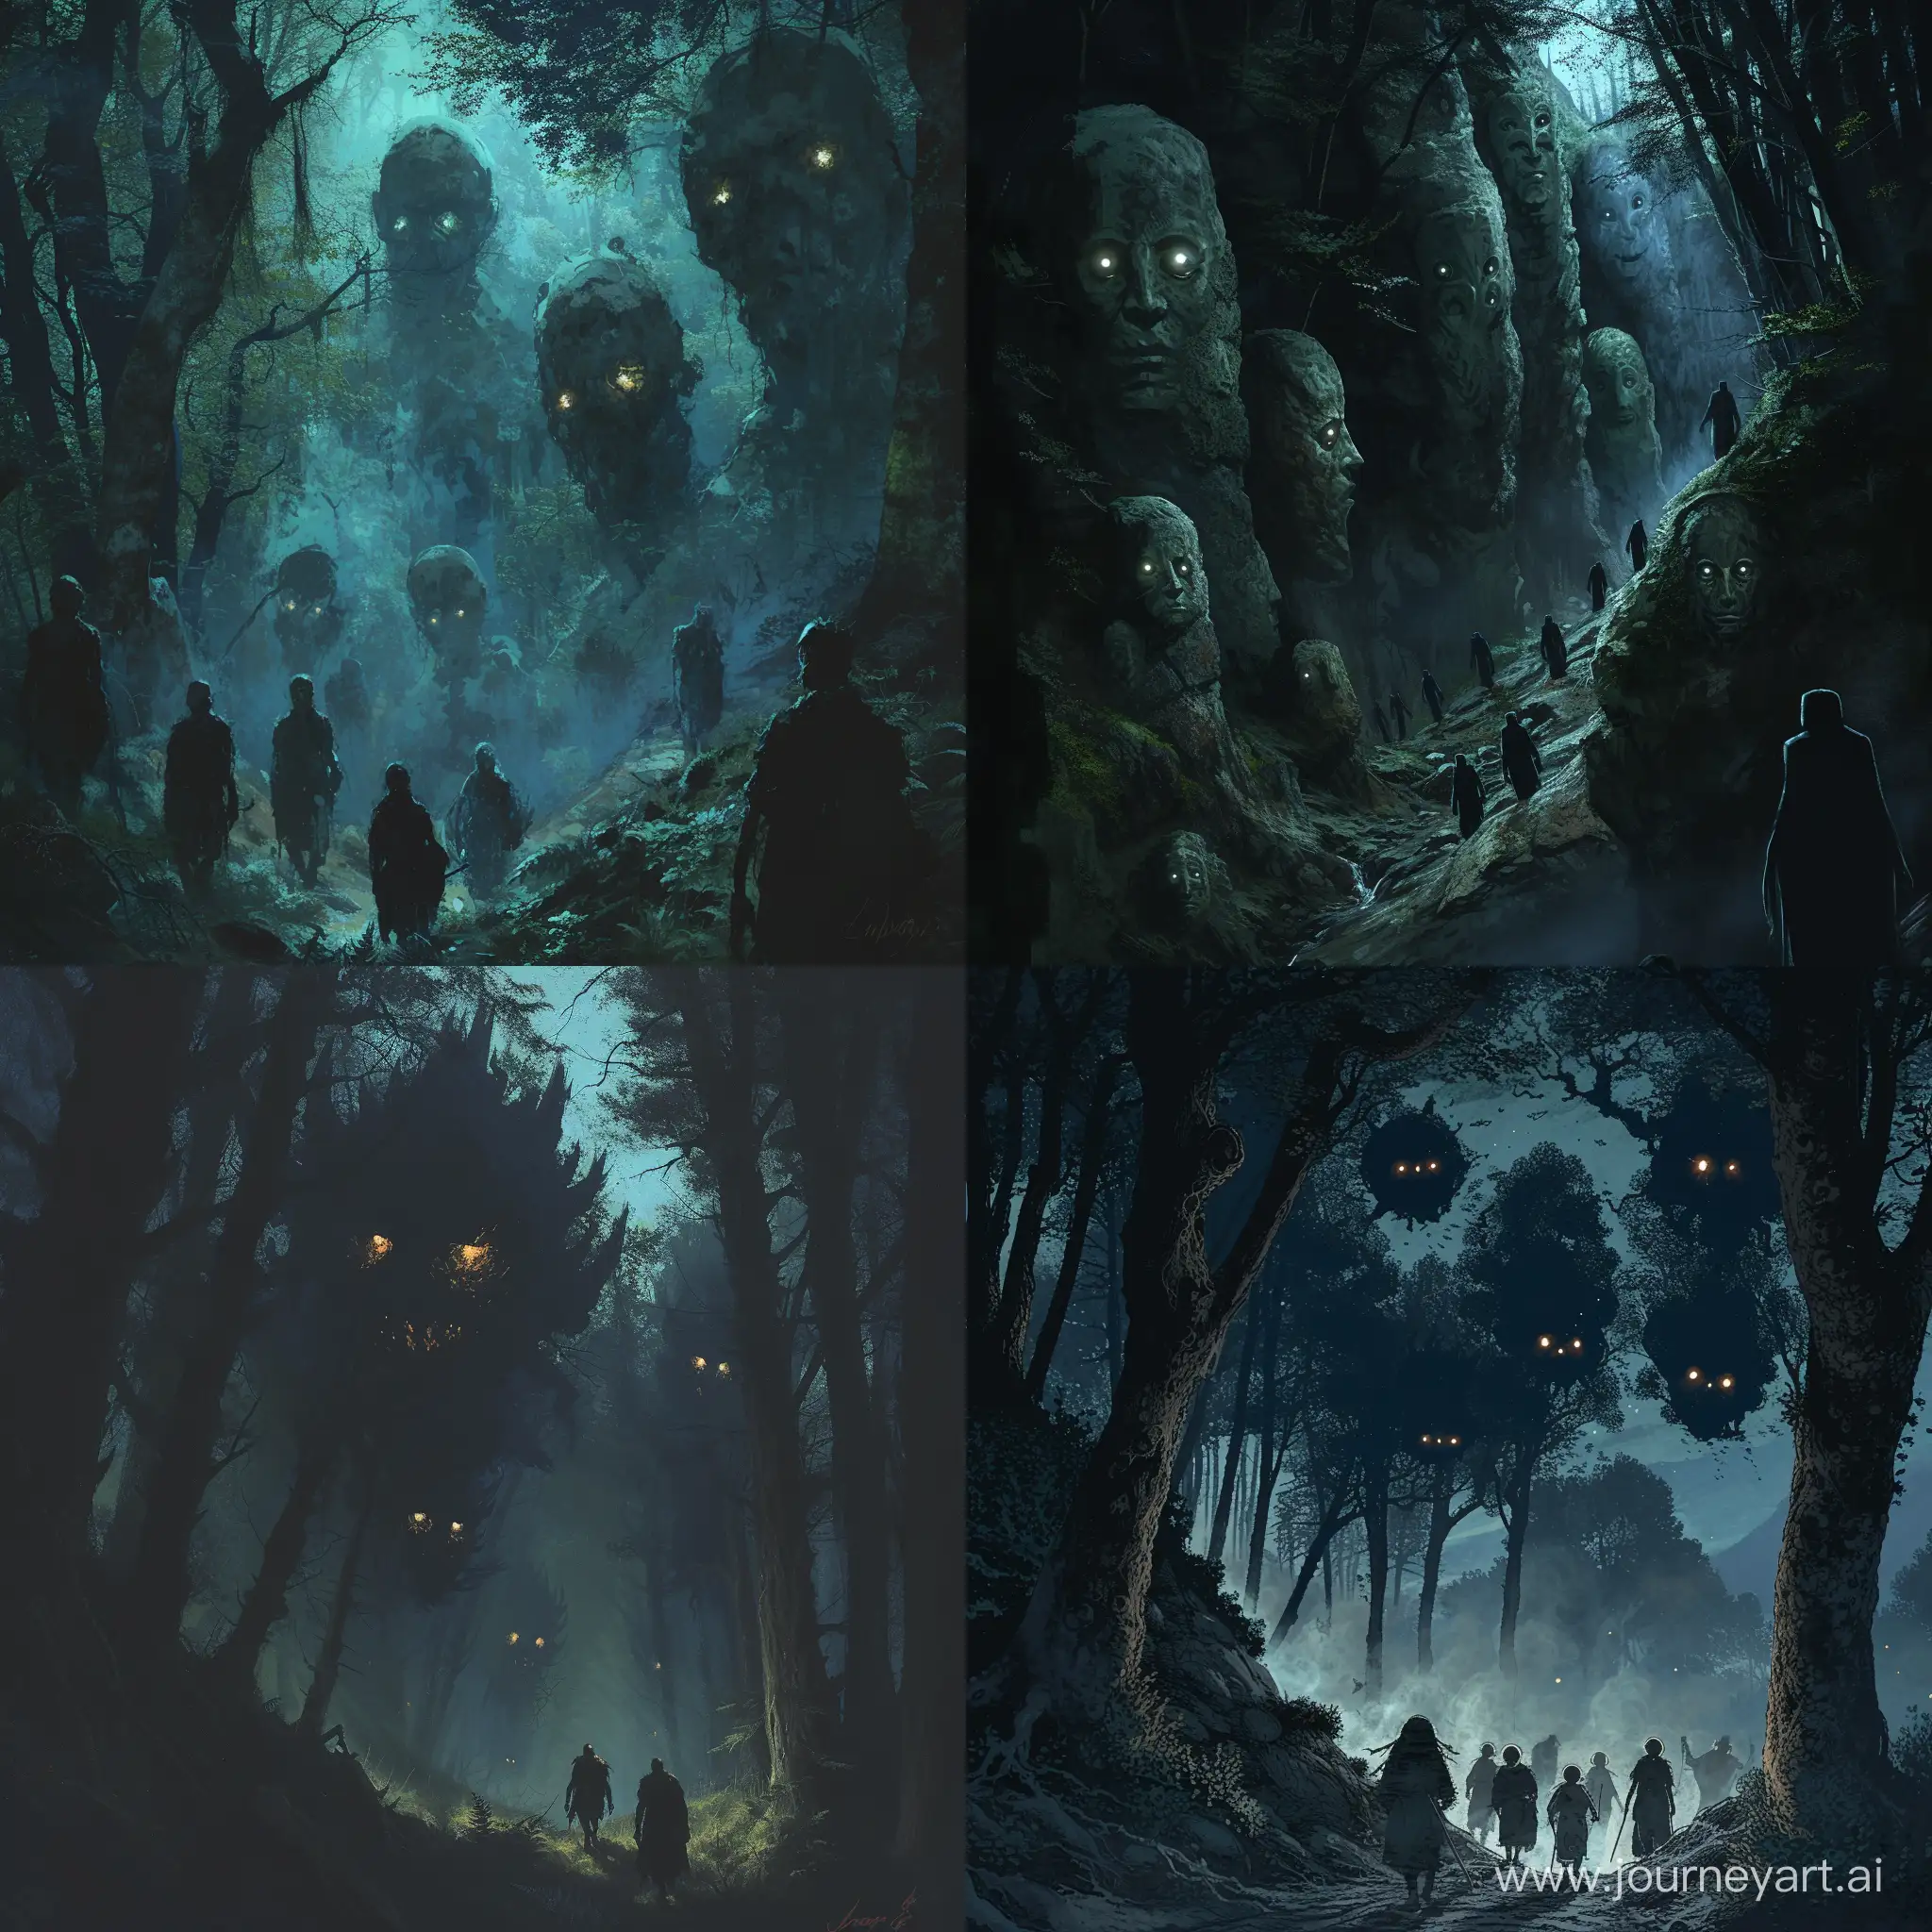 The Encroaching Darkness: As night falls, the forest comes alive with malevolent whispers, and shadowy figures begin to converge upon the unsuspecting travelers. Among them are demons with heads as large as boulders, their glowing eyes fixated on the interlopers who dare to trespass upon their domain.